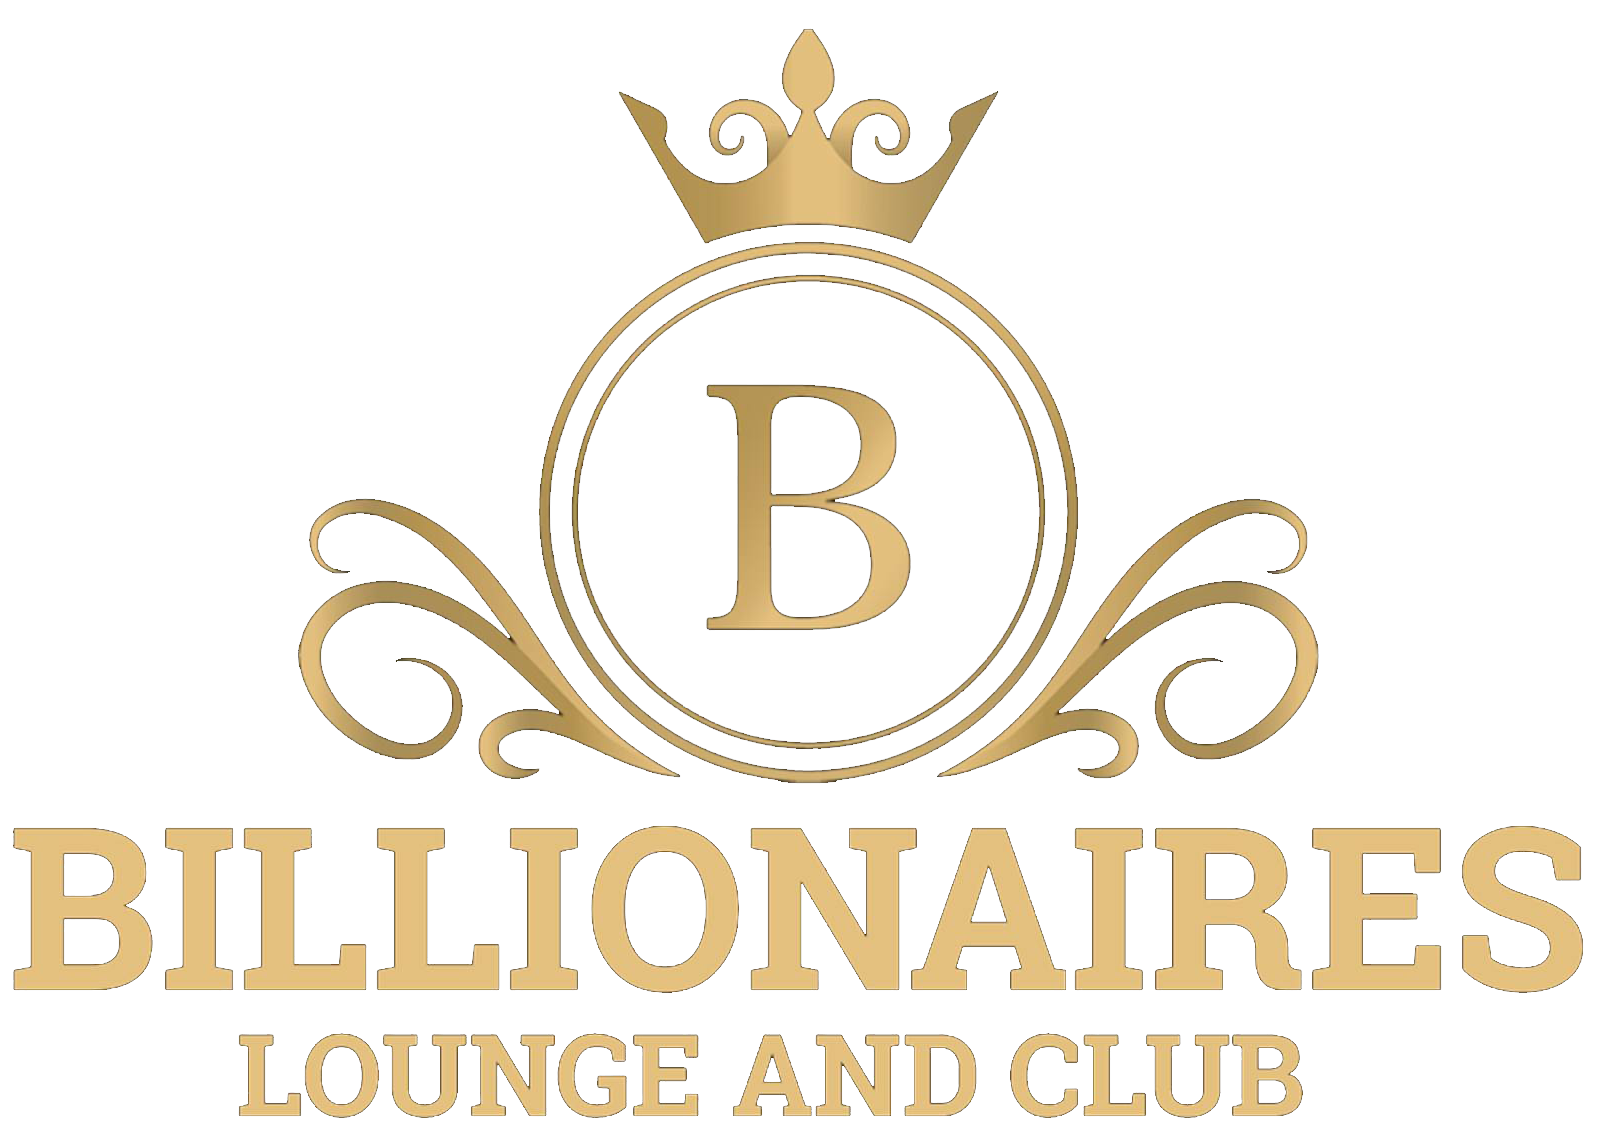 Billionaires Lounge and Club